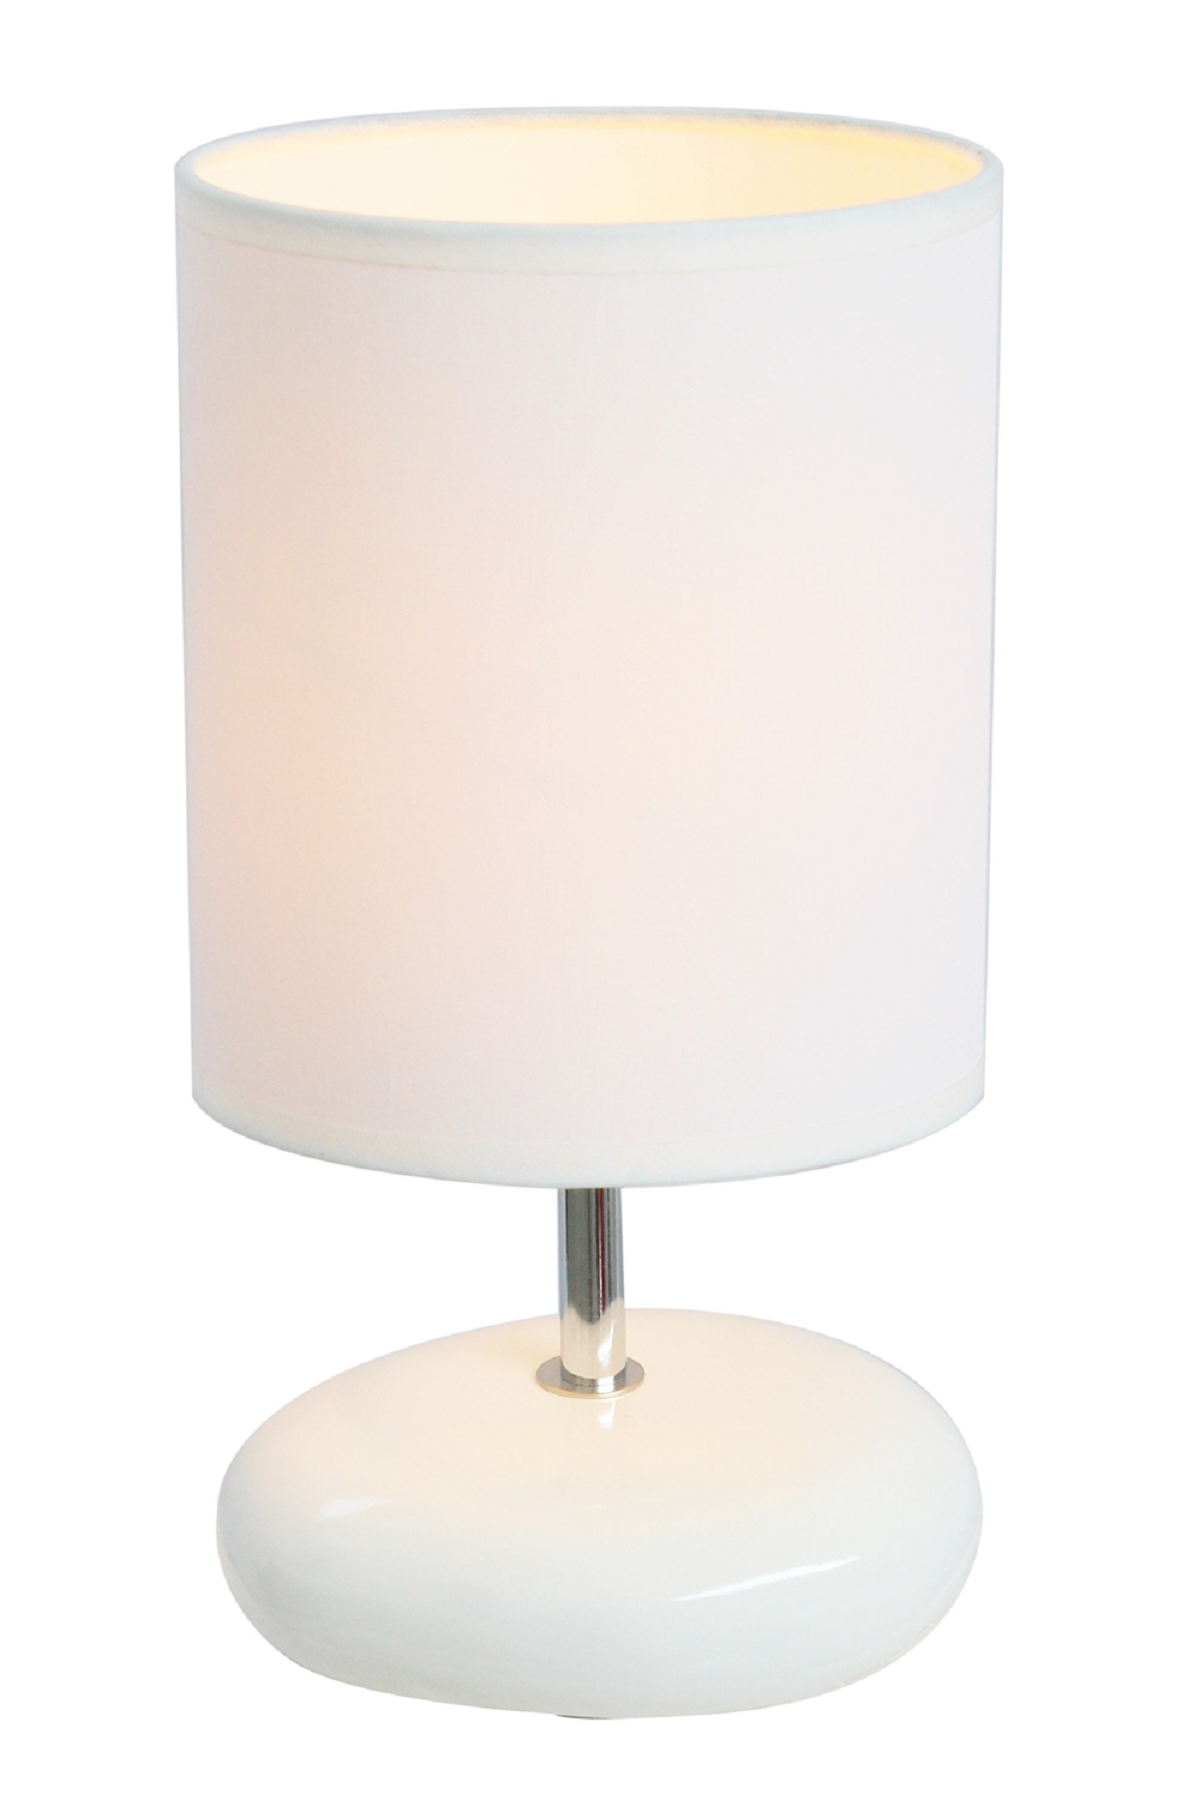 Simple Designs Stonies White Small Stone Look Table Lamp